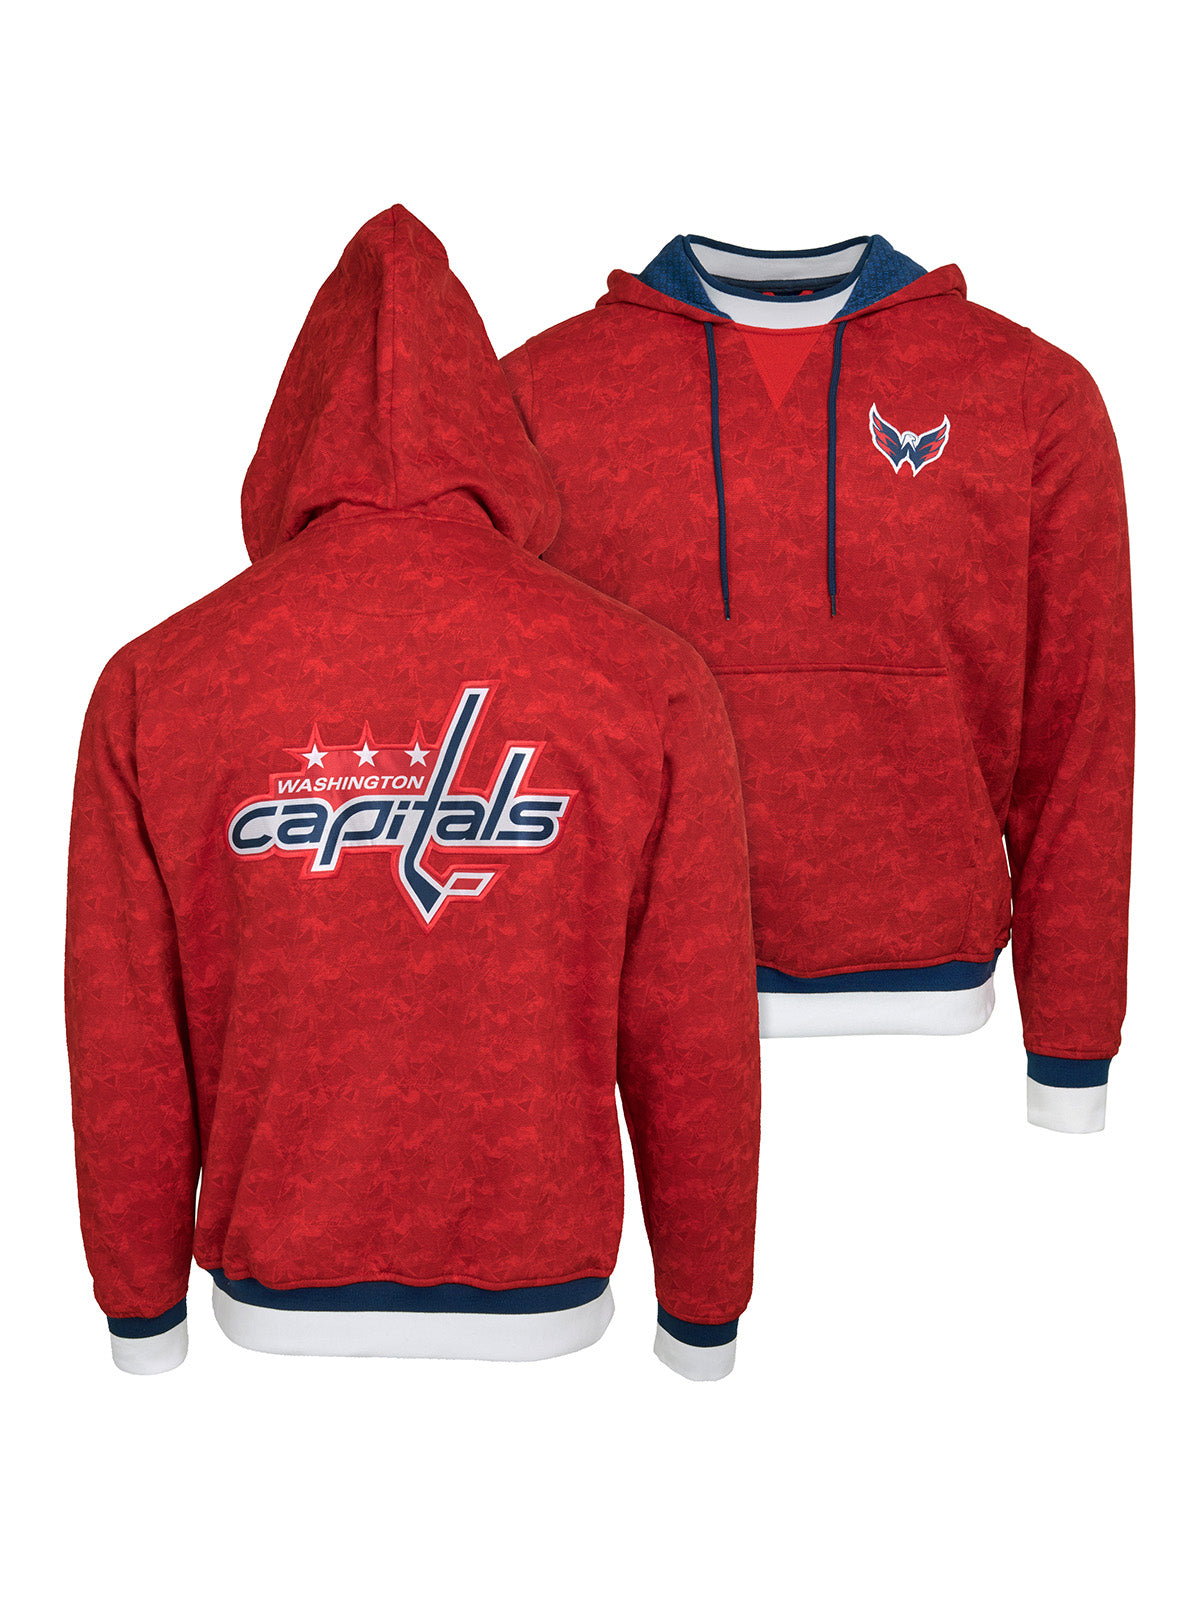 Washington Capitals Hoodie - Show your team spirit, with the iconic team logo patch on the front and back, and proudly display your Washington Capitals support in their team colors with this NHL hockey hoodie.